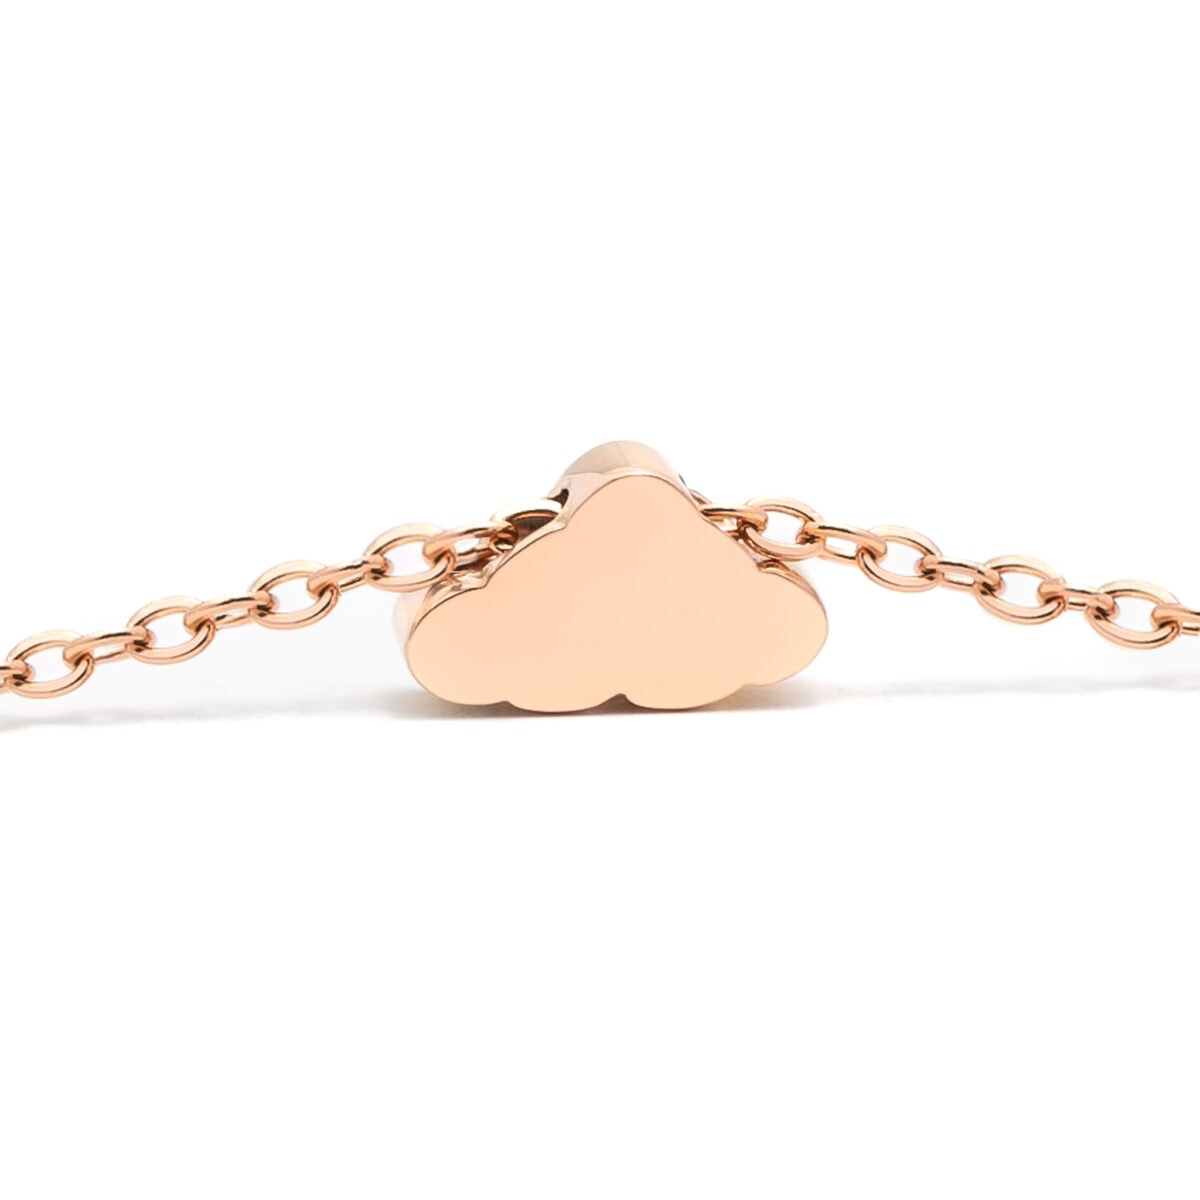 https://m.clubbella.co/product/volare-cloud-rose-gold-charm-bracelet/ VOlare Cloud Rose Gold Charm (1)